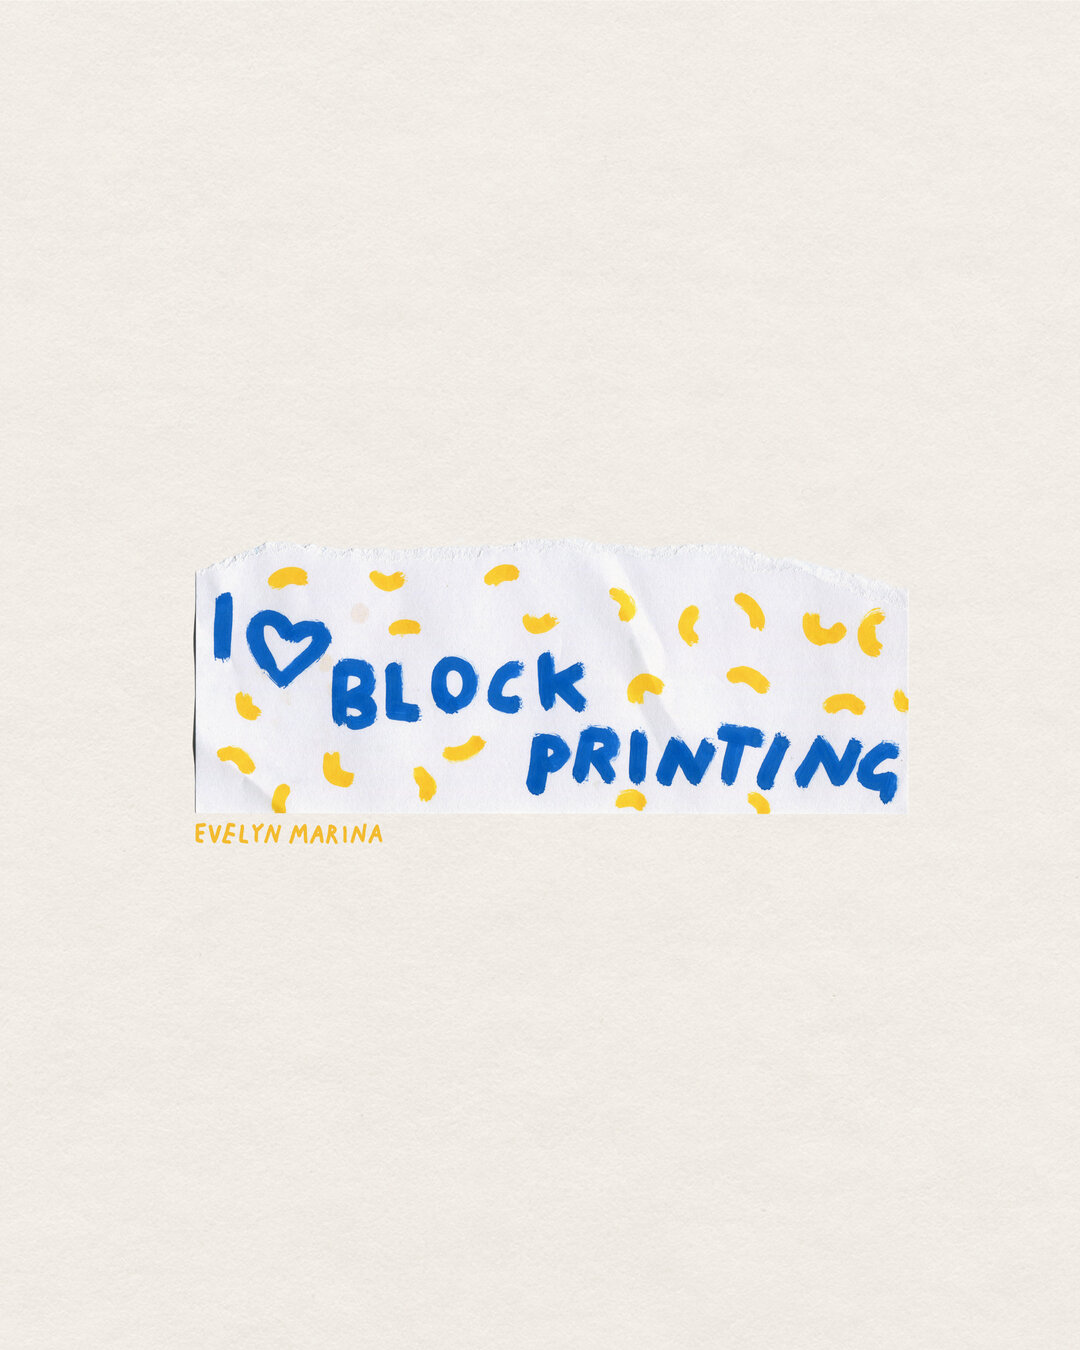 i love block printing part 1 and part 2.​​​​​​​​​
who else laughed at their dad because he wrote in block letters?